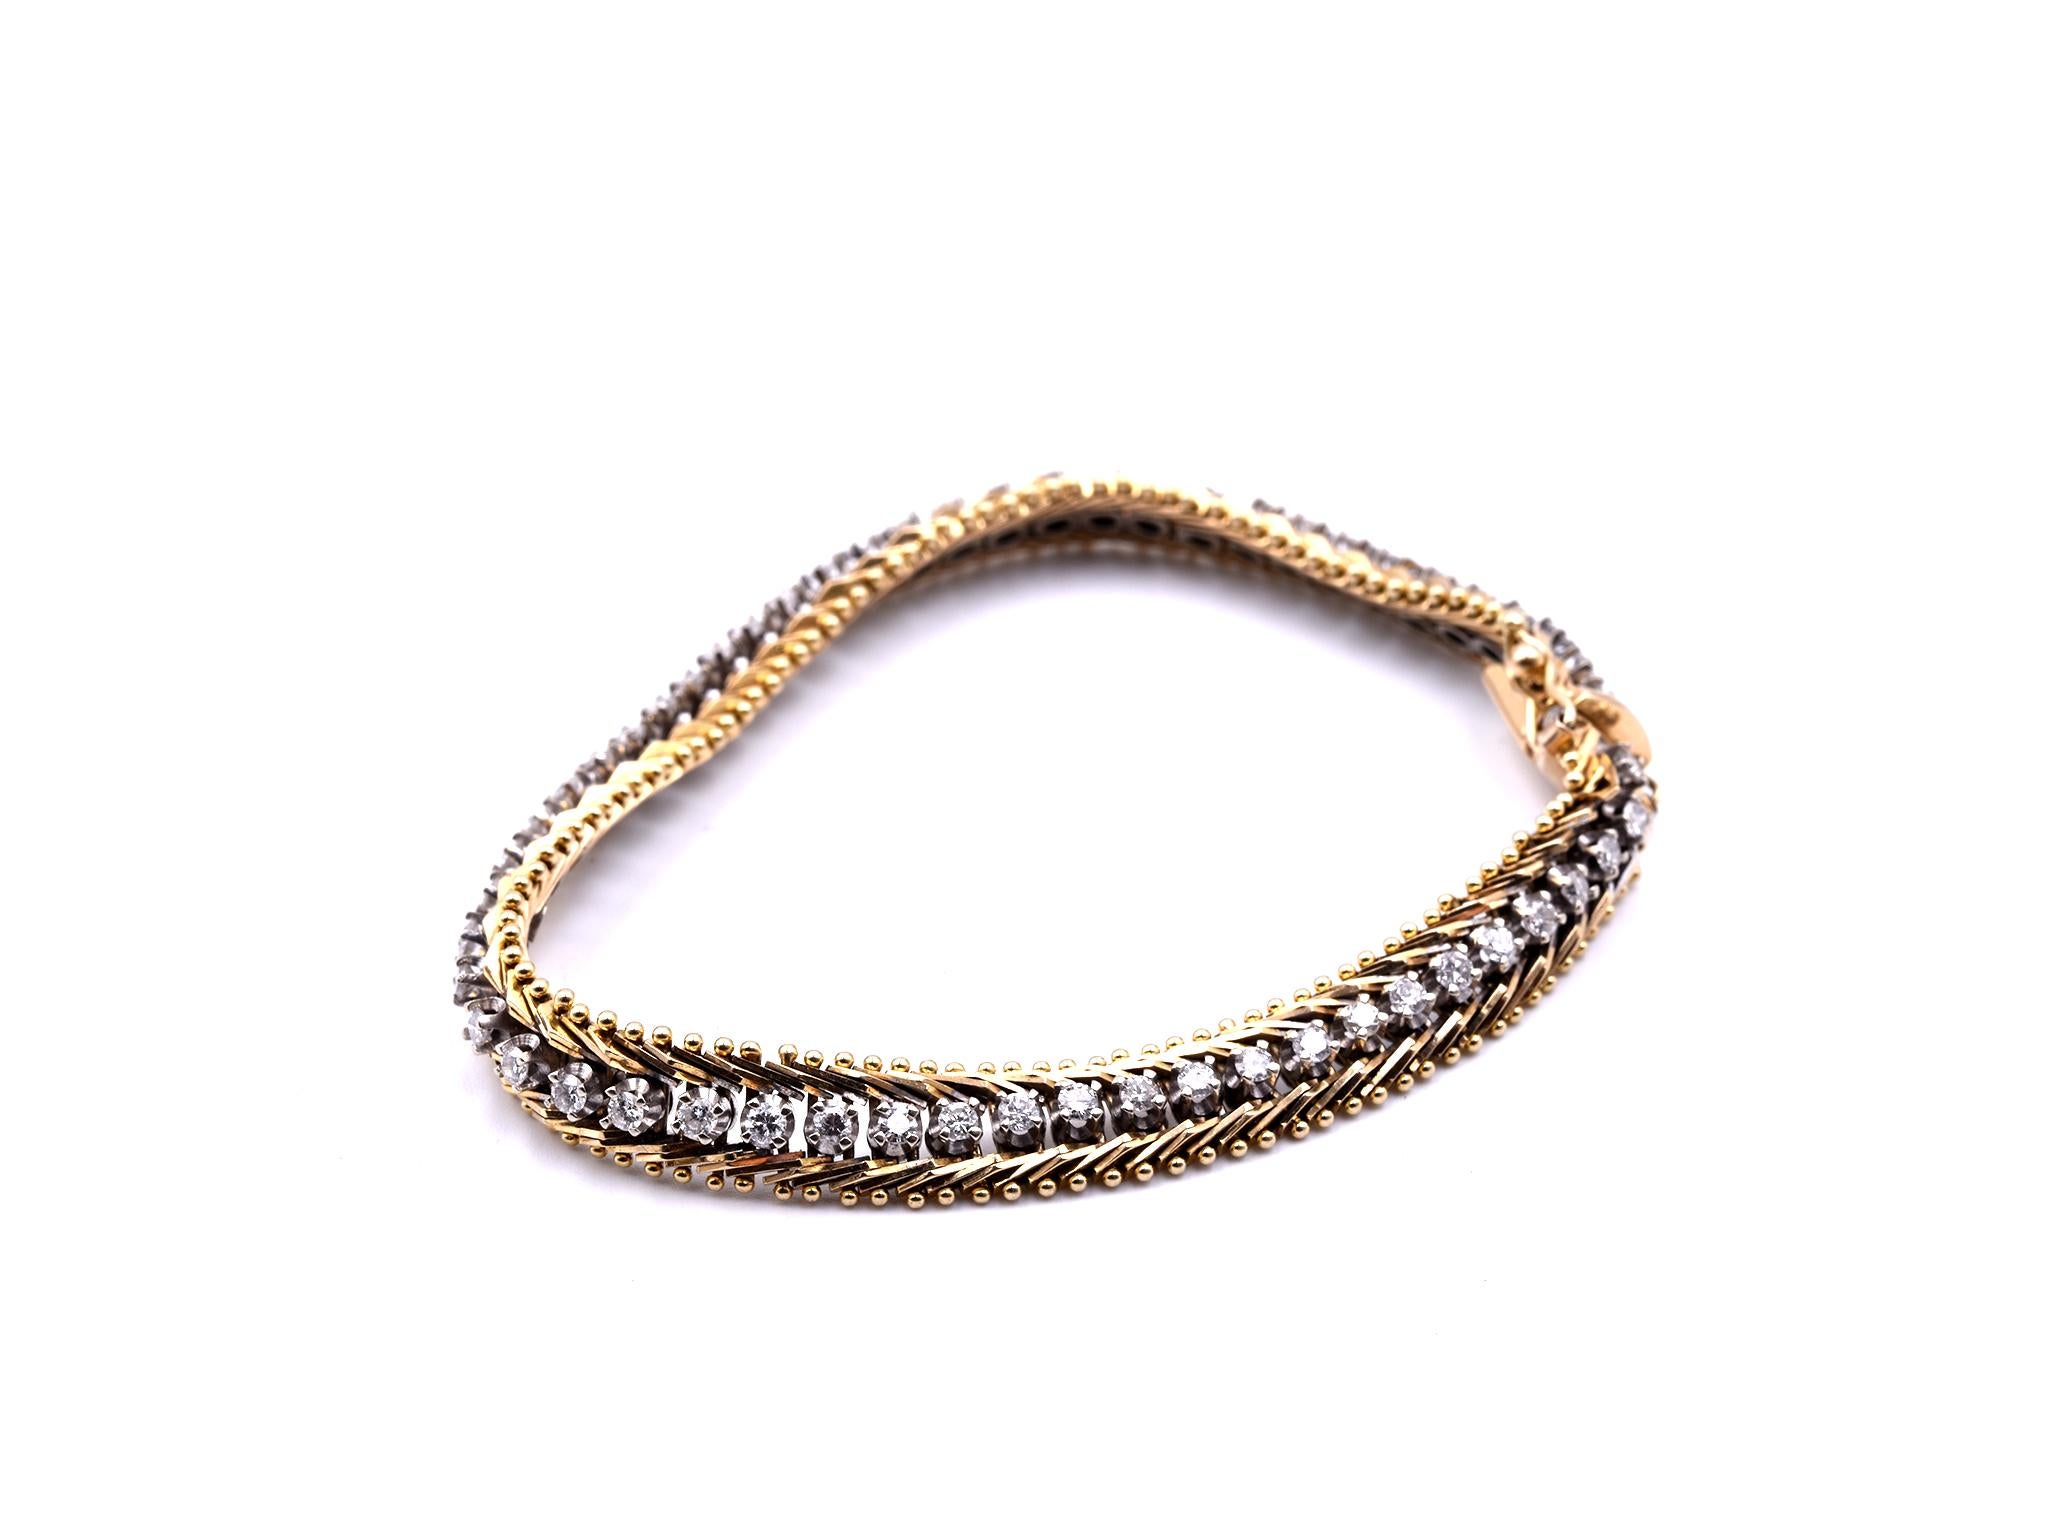 Designer: custom
Material: 14k yellow gold
Diamond: 55 round brilliant cut = 1.65cttw
Color: I
Clarity: SI1-2
Dimensions: bracelet will fit a 7 ½ inch wrist and it is 7.98mm wide
Weight: 19.60 grams
